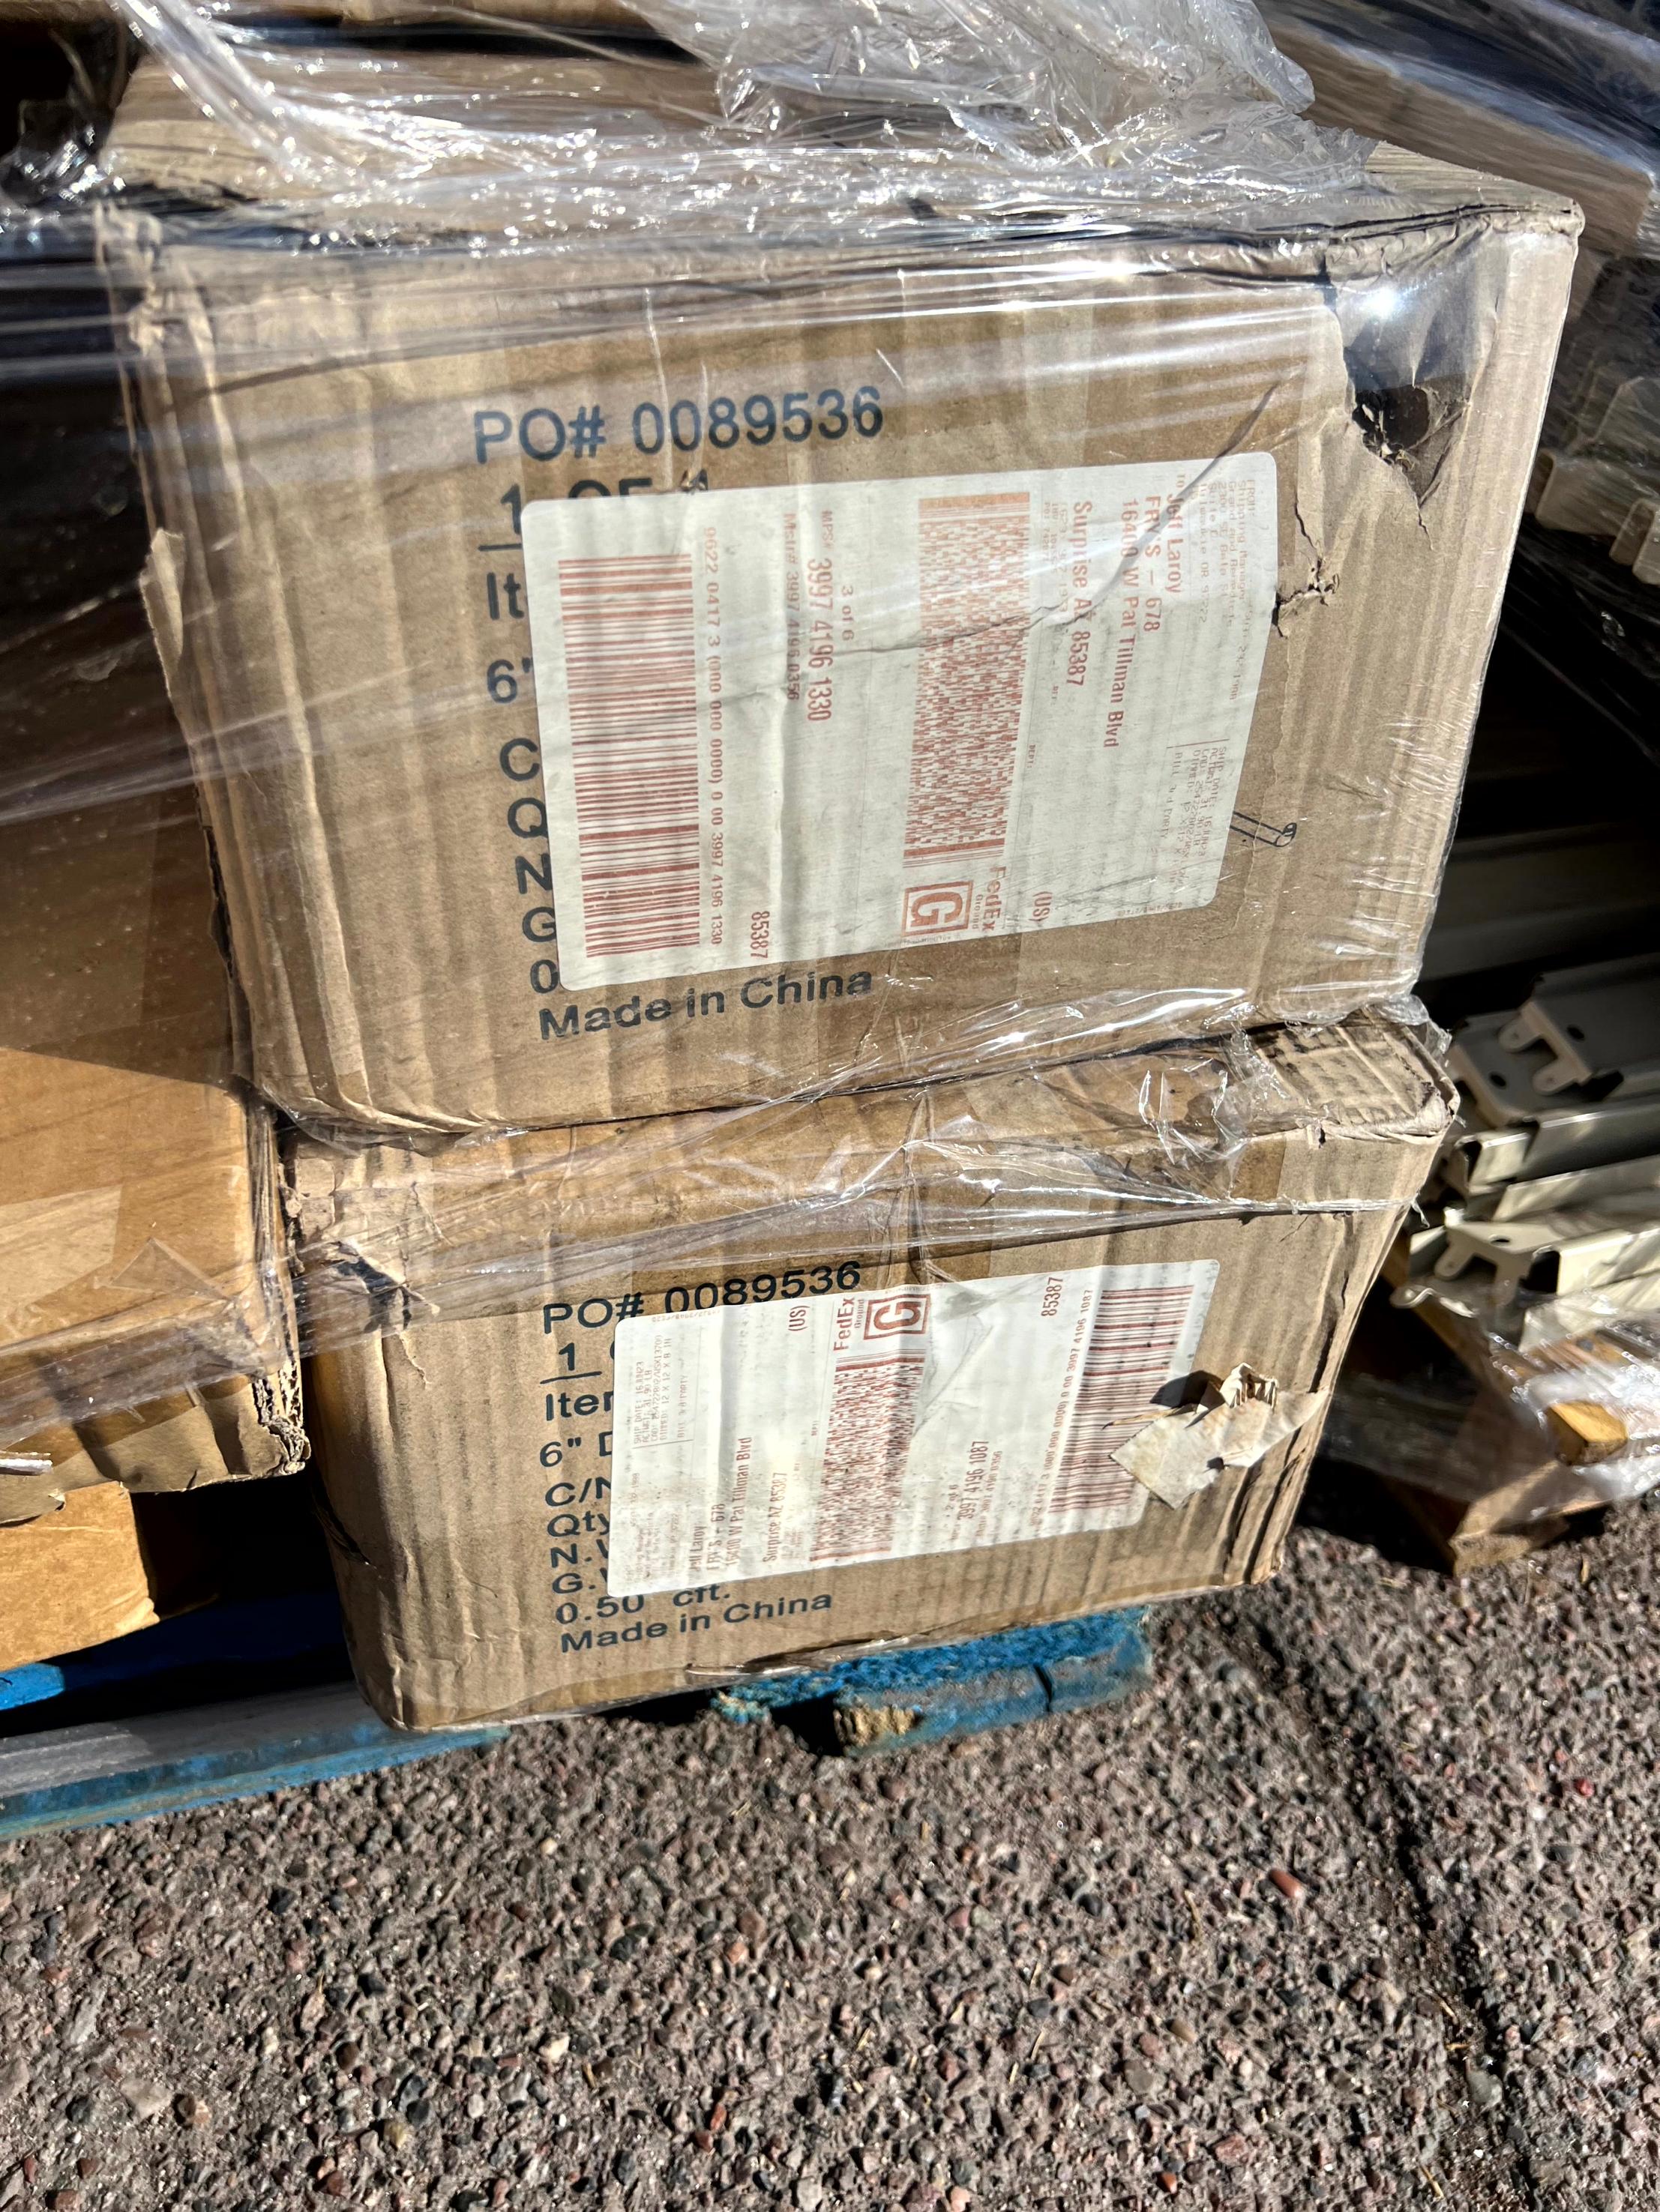 Pallet of Grand and Benedicts Fixtures